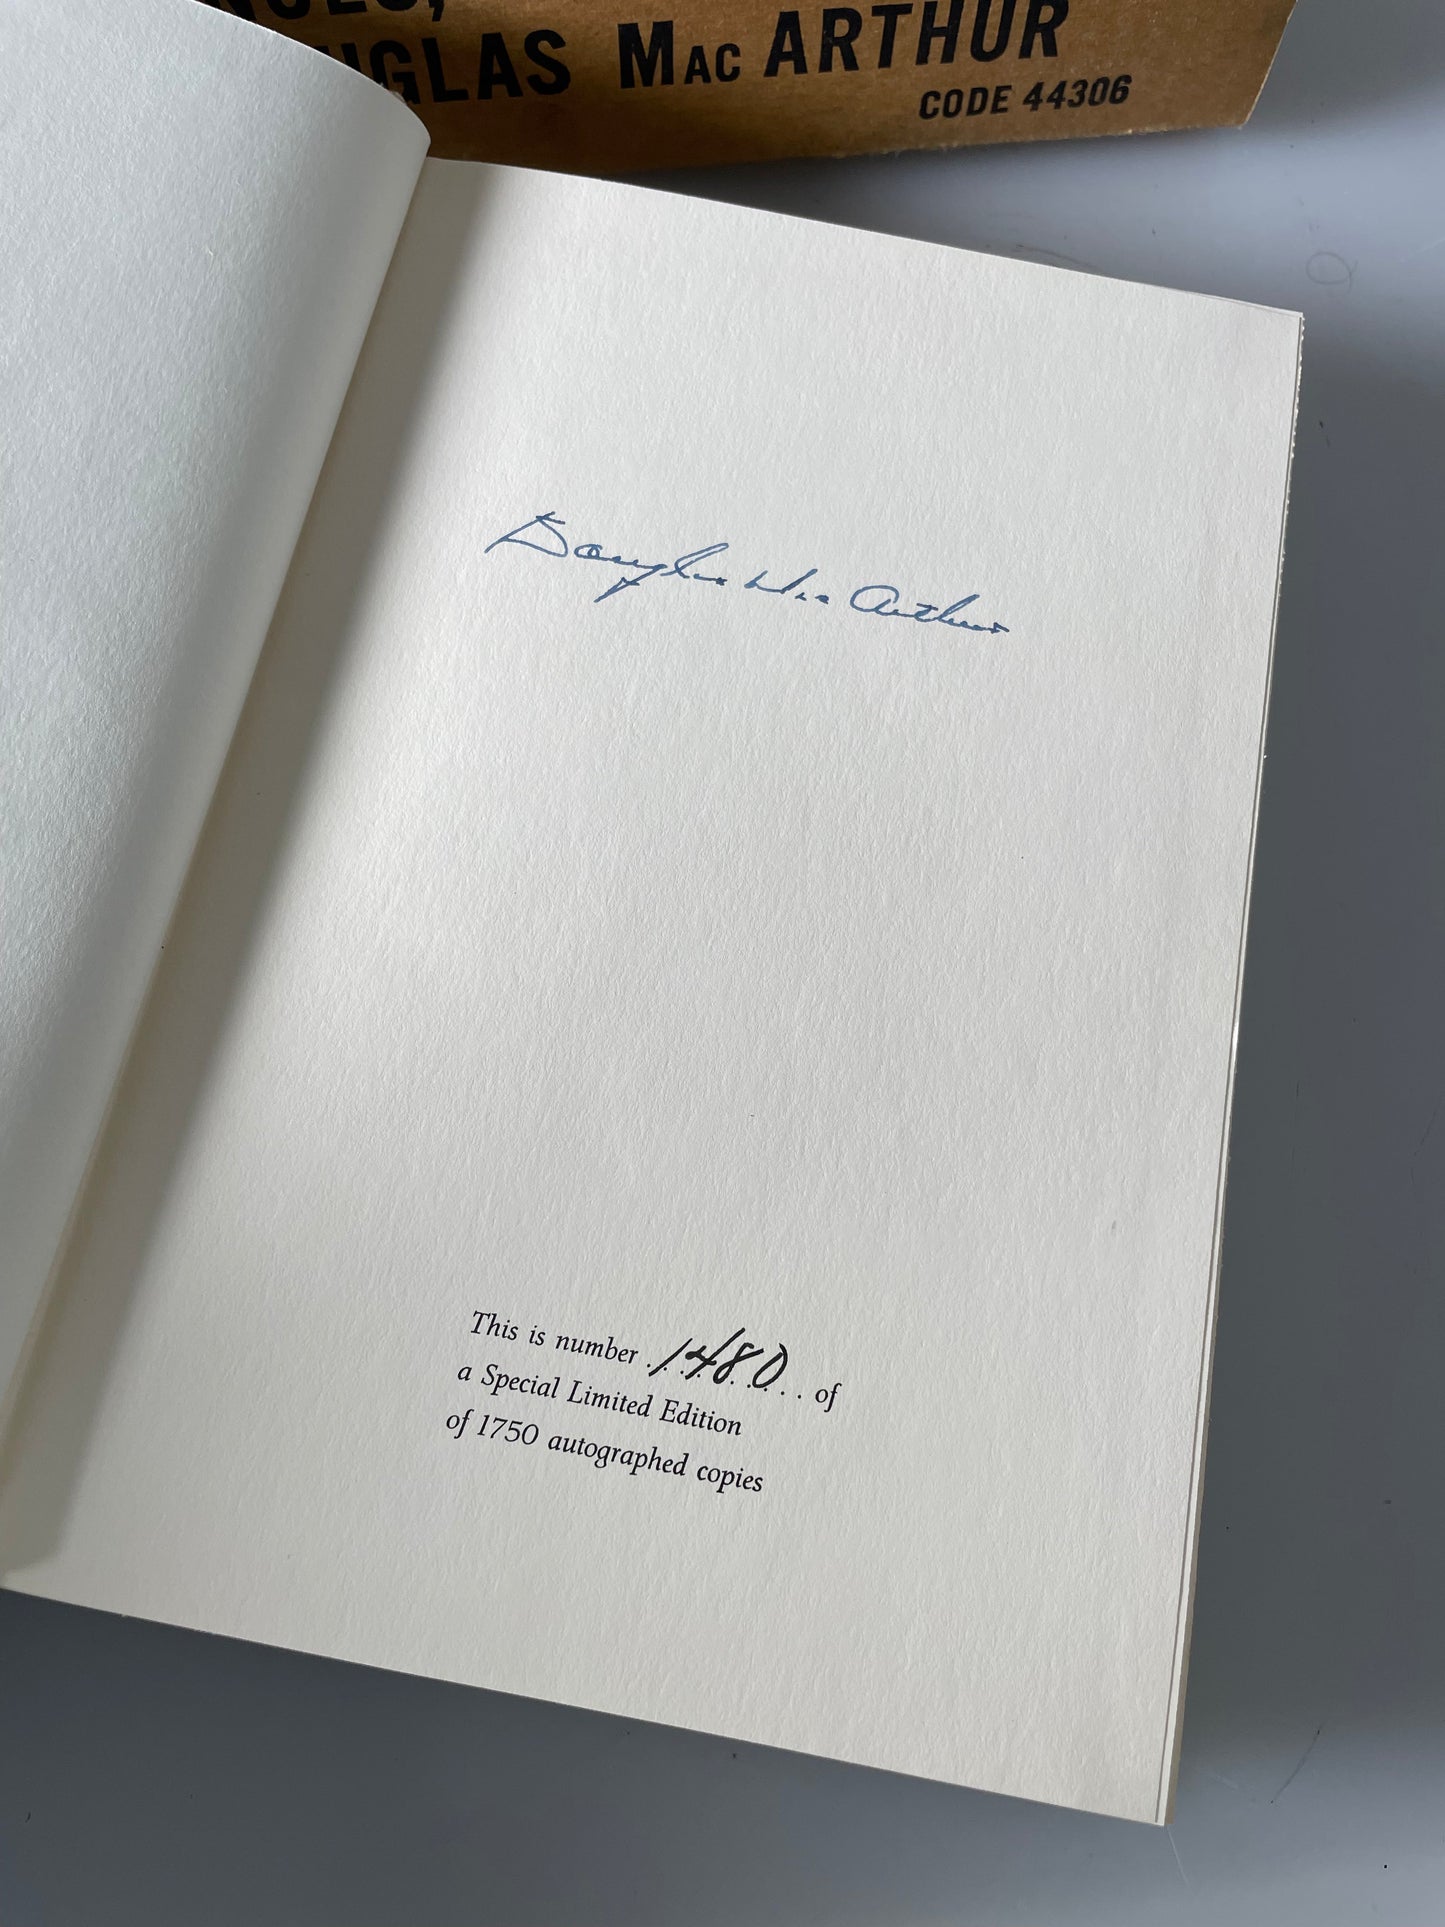 Special Limited Edition of "Reminiscences" SIGNED by General Douglas MacArthur 1479/1750